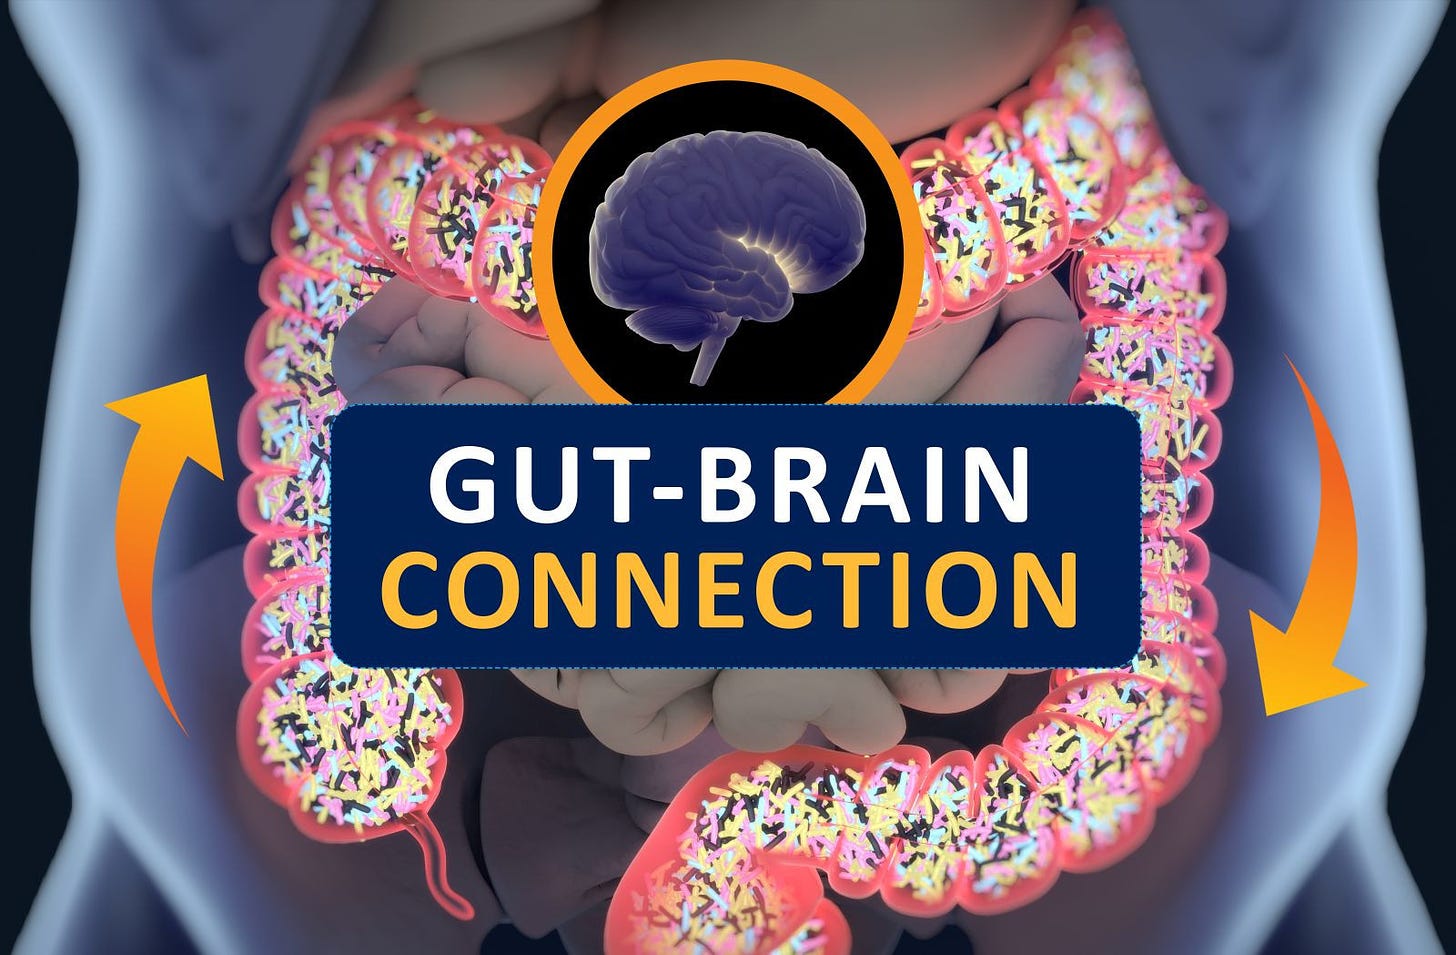 the gut-brain connection